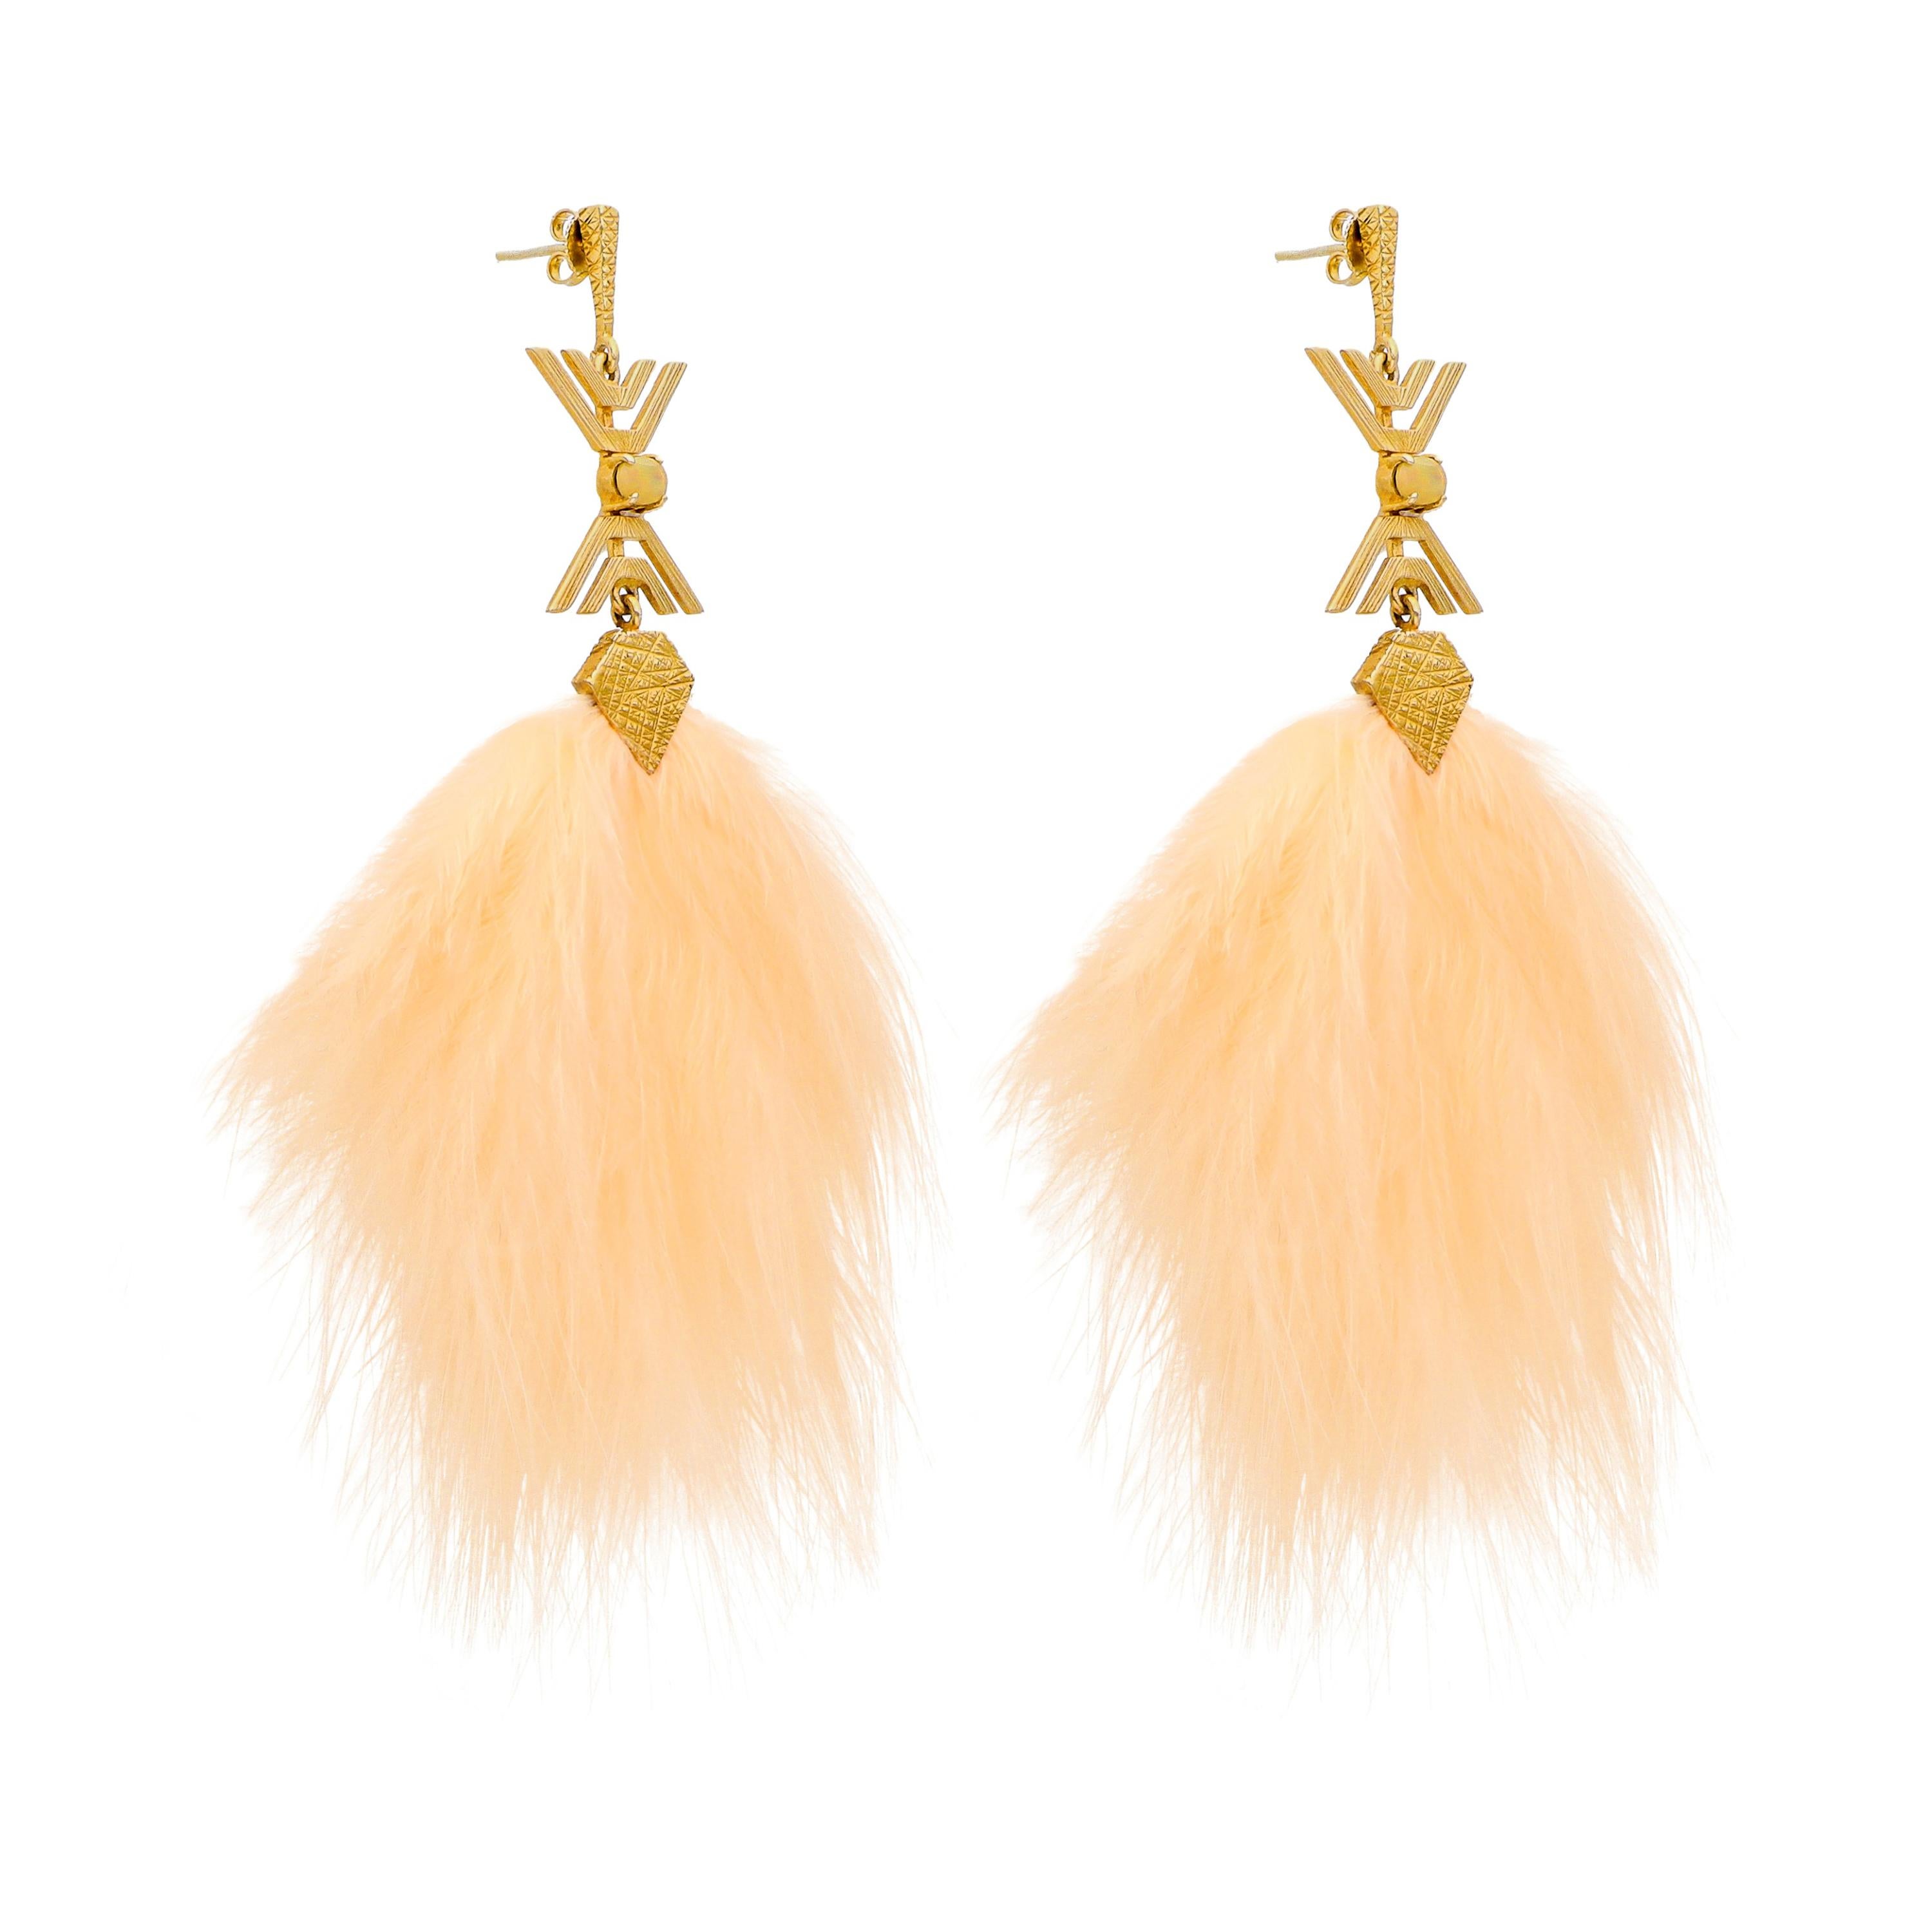 Libertad Earrings, masterfully crafted in 14k yellow gold and inspired by our cherished symbol of freedom, imagined through the lens of ancient aesthetics. These exceptional earrings capture the essence of strength, humility, and power, embodying a